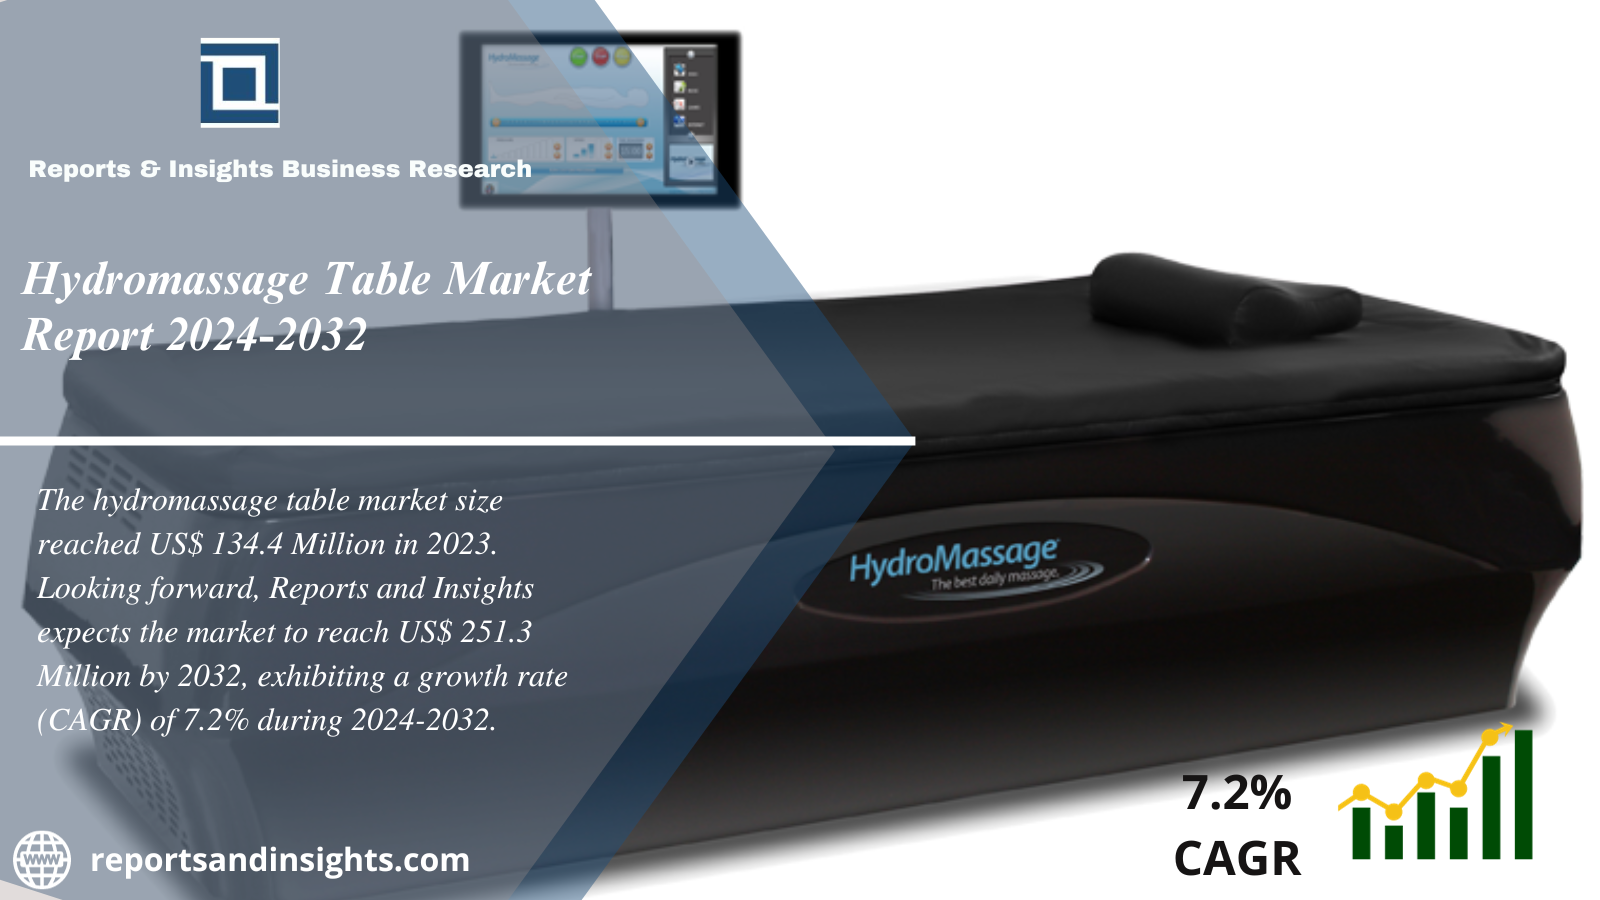 Hydromassage Table Market 2024-2032: Trends, Share, Size, Growth and Opportunities